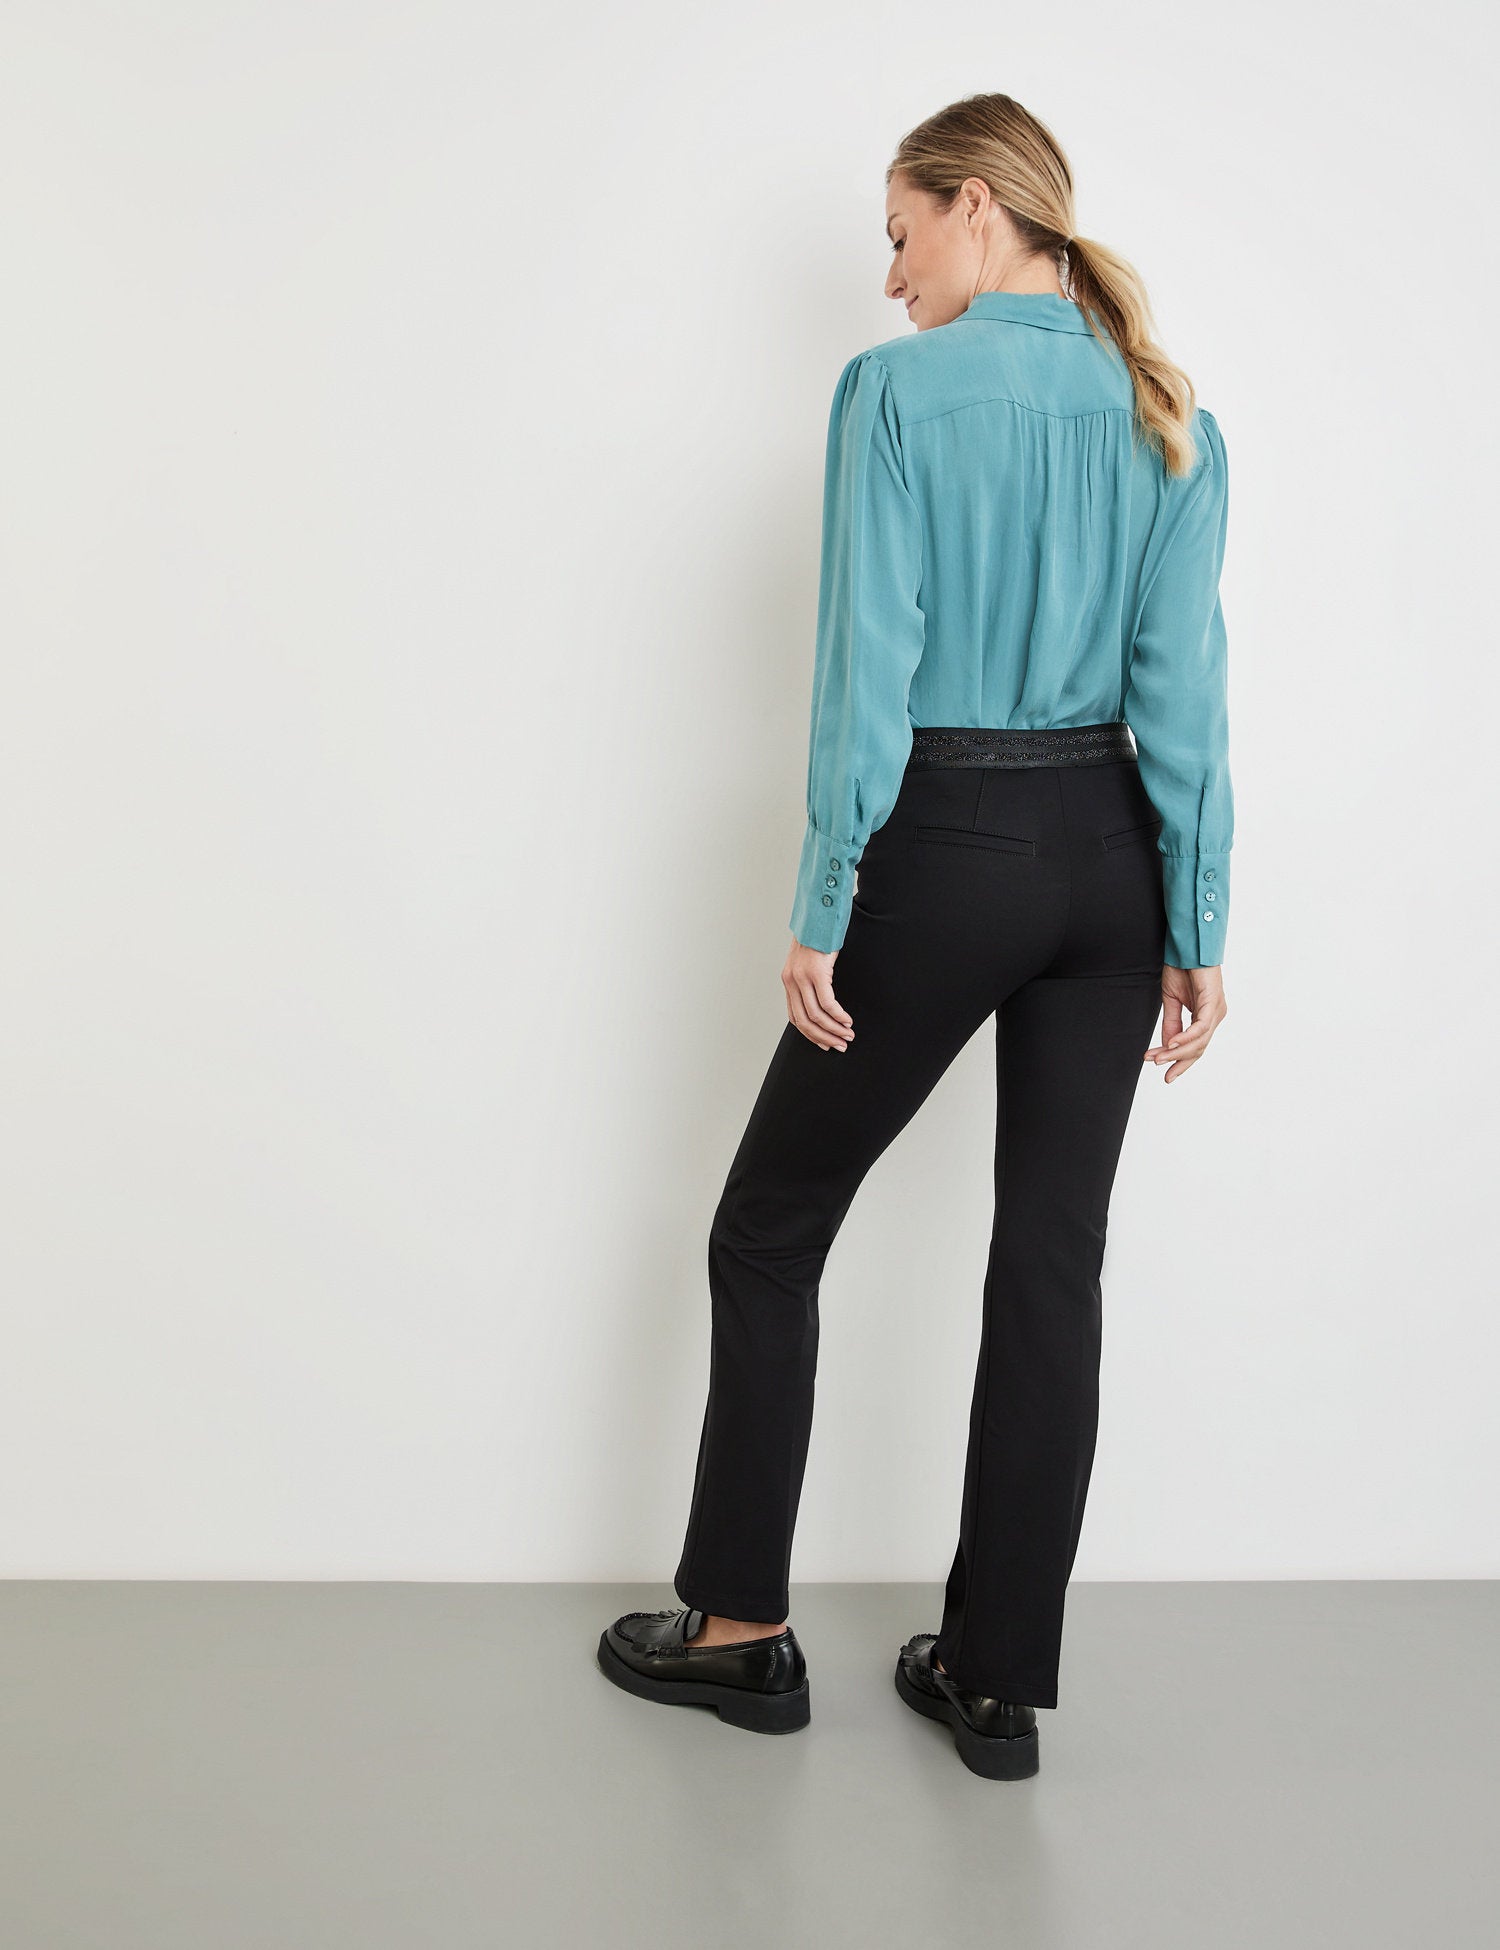 Flared Stretch Trousers In A Slim Fit With An Elasticated Waistband And Added Lurex_122100-67802_11000_06